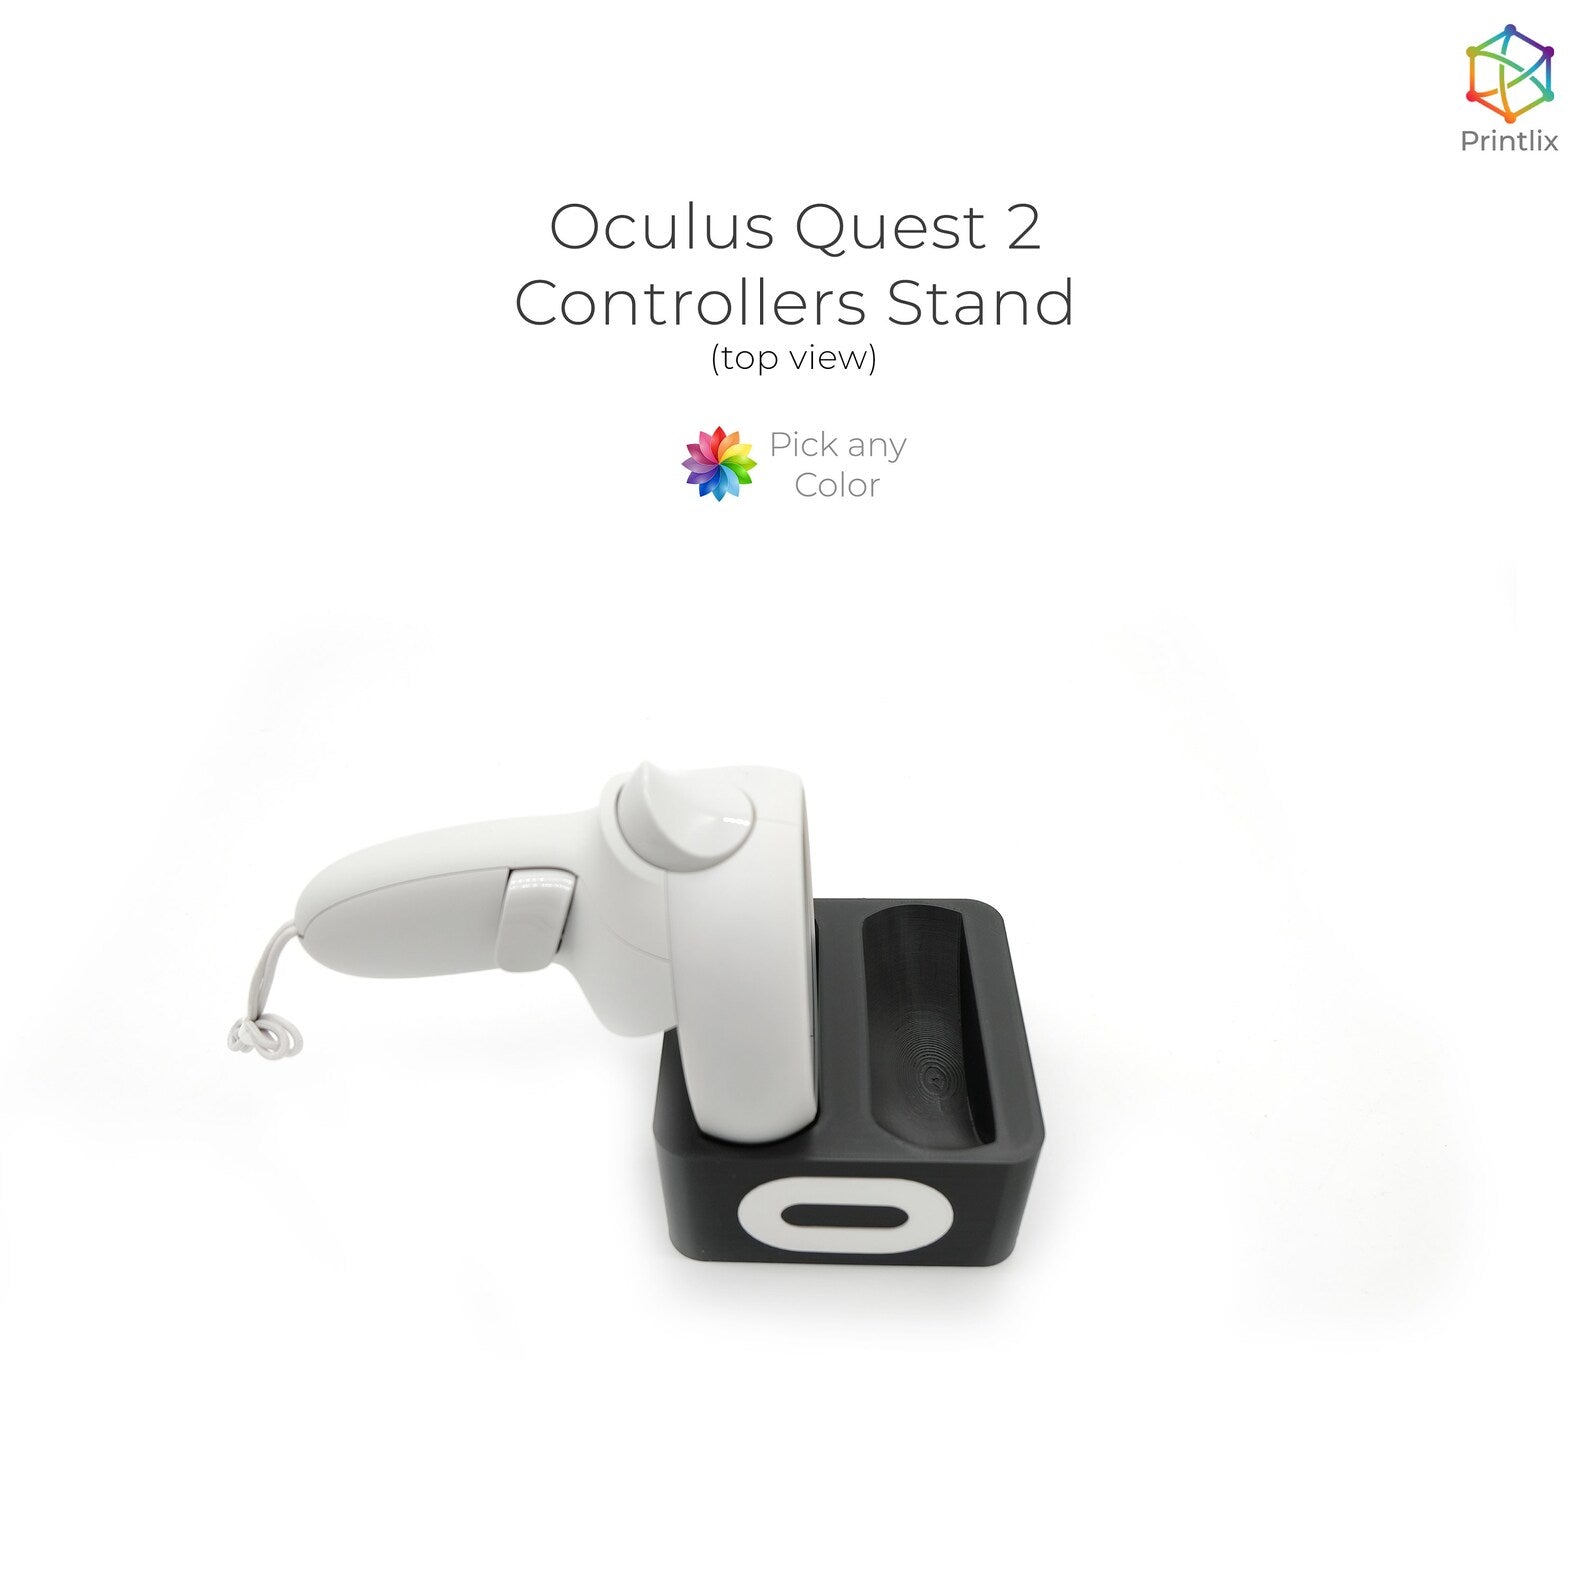 Oculus Quest 2 Controllers Stand